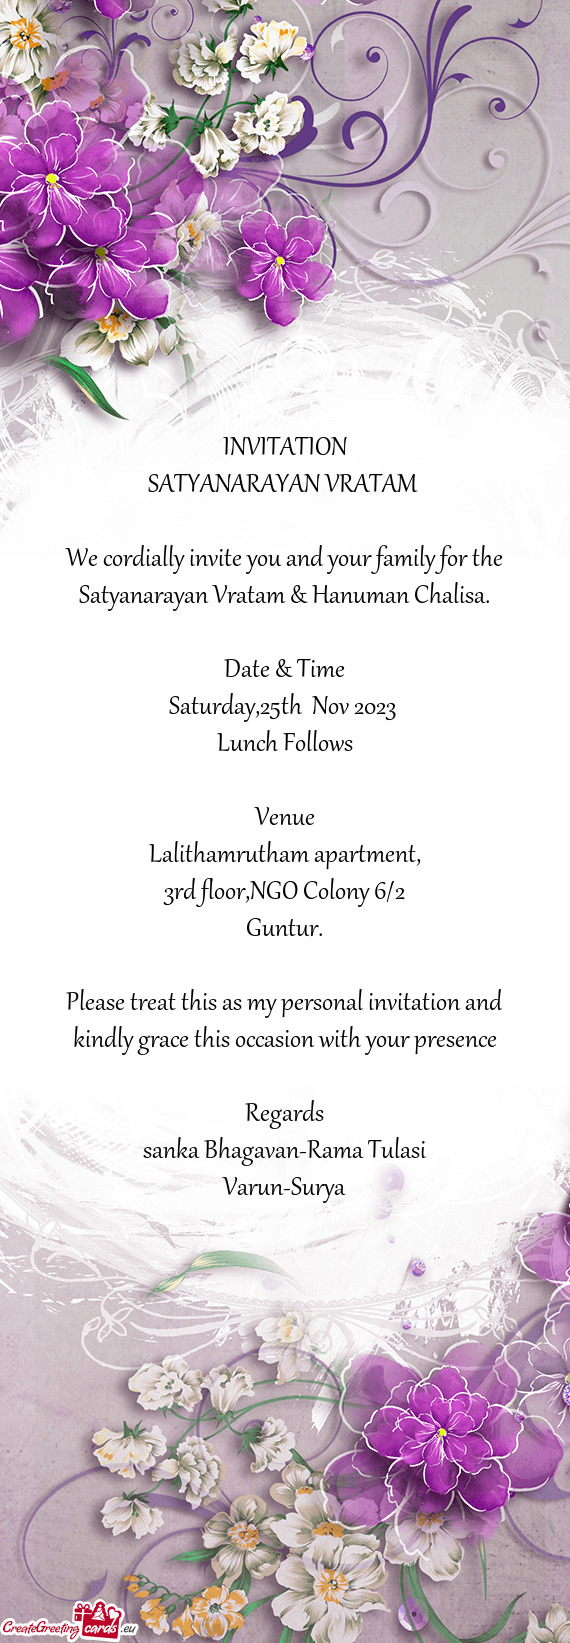 We cordially invite you and your family for the Satyanarayan Vratam & Hanuman Chalisa